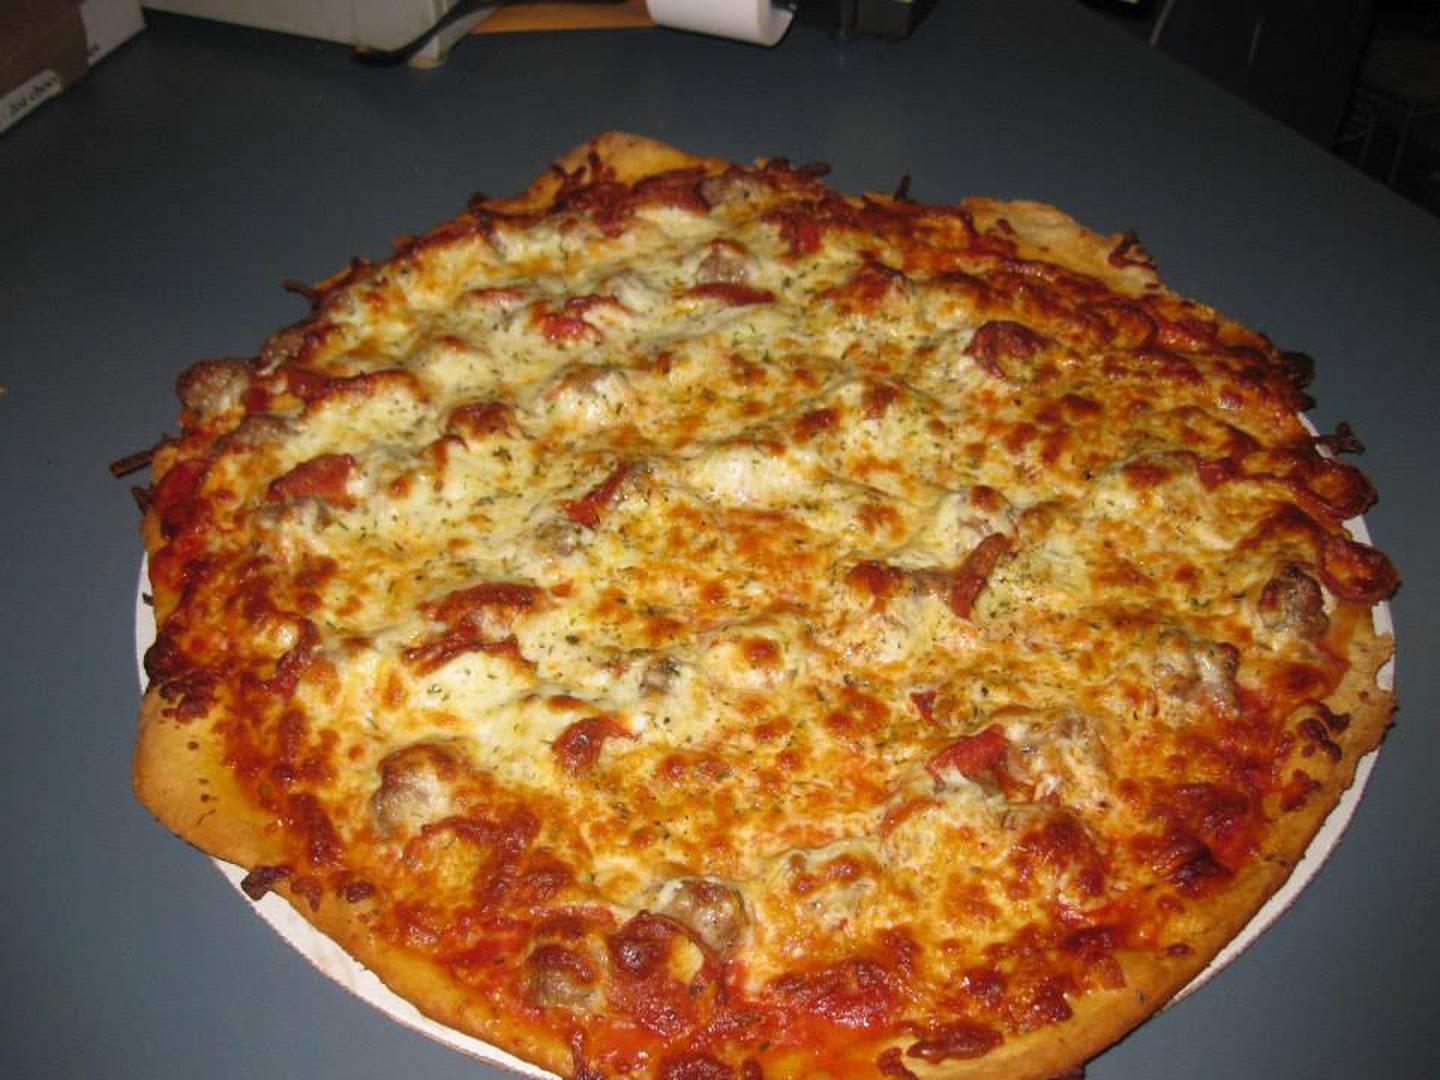 Villa Nova Stickney in Stickney was named in the top nine pizza places in the Cook County area by readers in 2021.